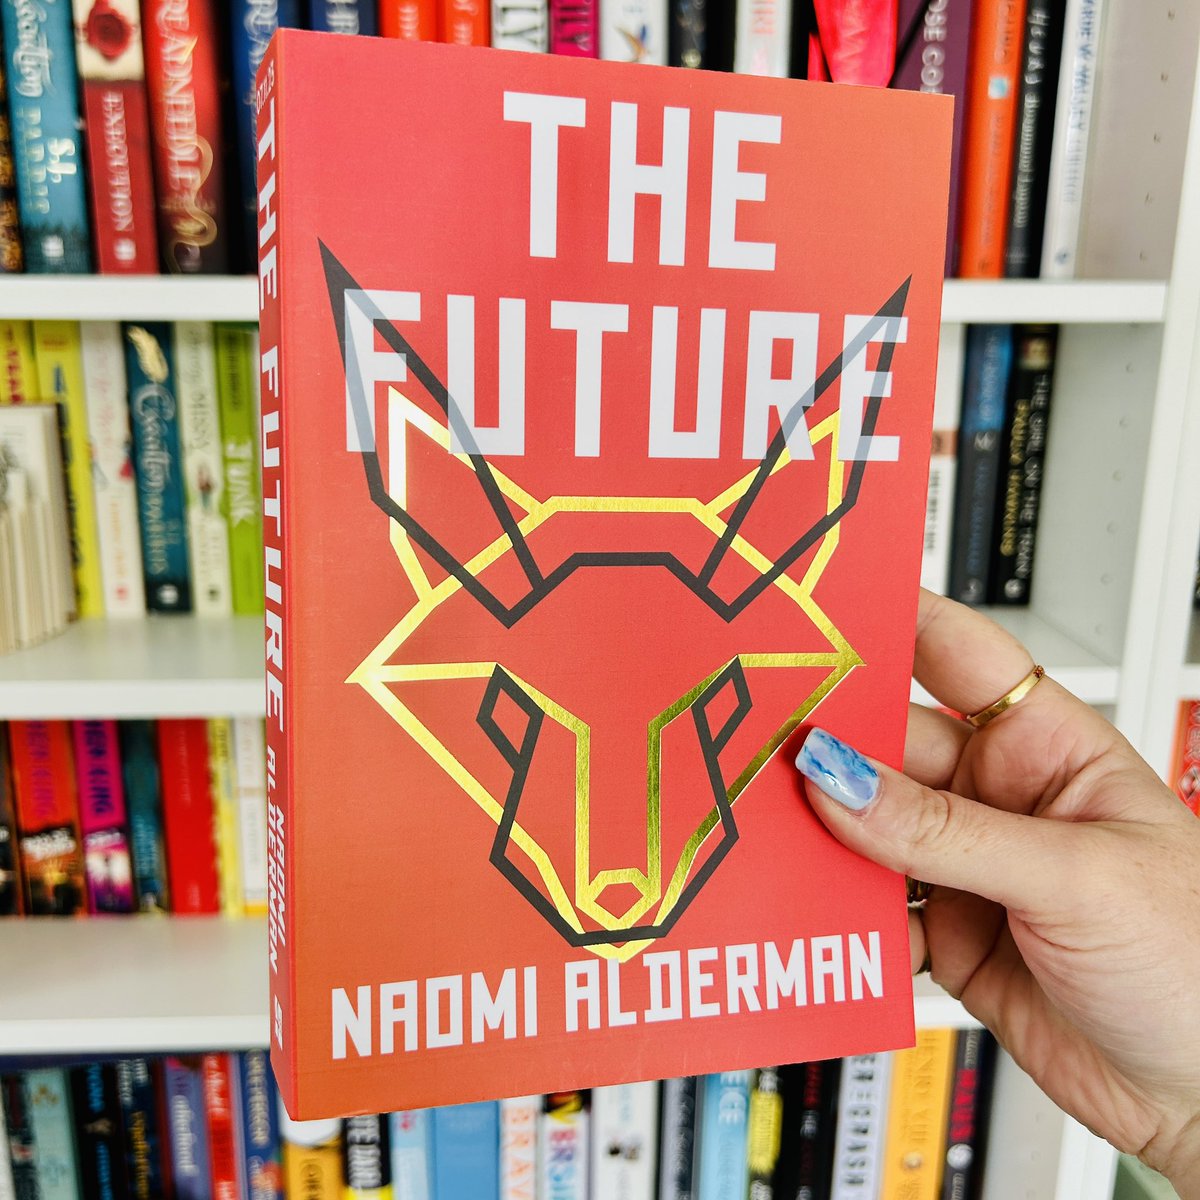 Apparently I manifested reading this book HARD because the amazing @4thEstateBooks accidentally sent me two copies 🦊 ✨ (thank you guys you’re the best)

SO, who would like to win one? All you gotta do is follow & RT, I’ll pick a winner on Friday! #TheFuture @naomialderman